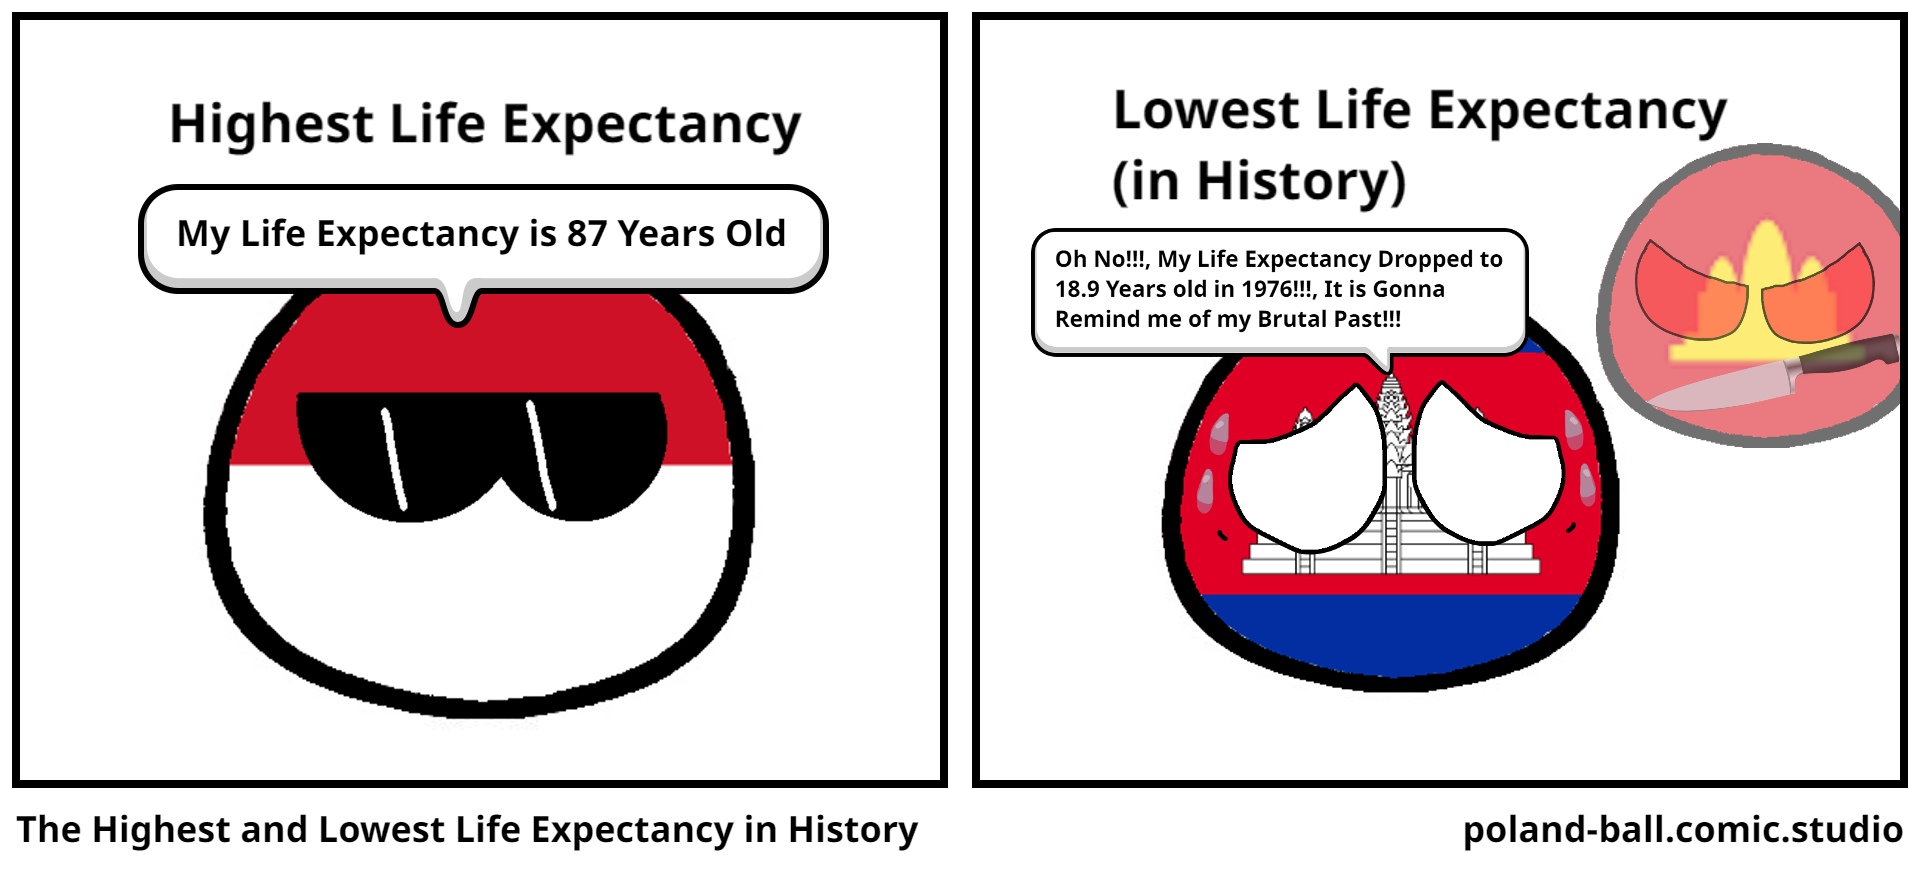 The Highest and Lowest Life Expectancy in History